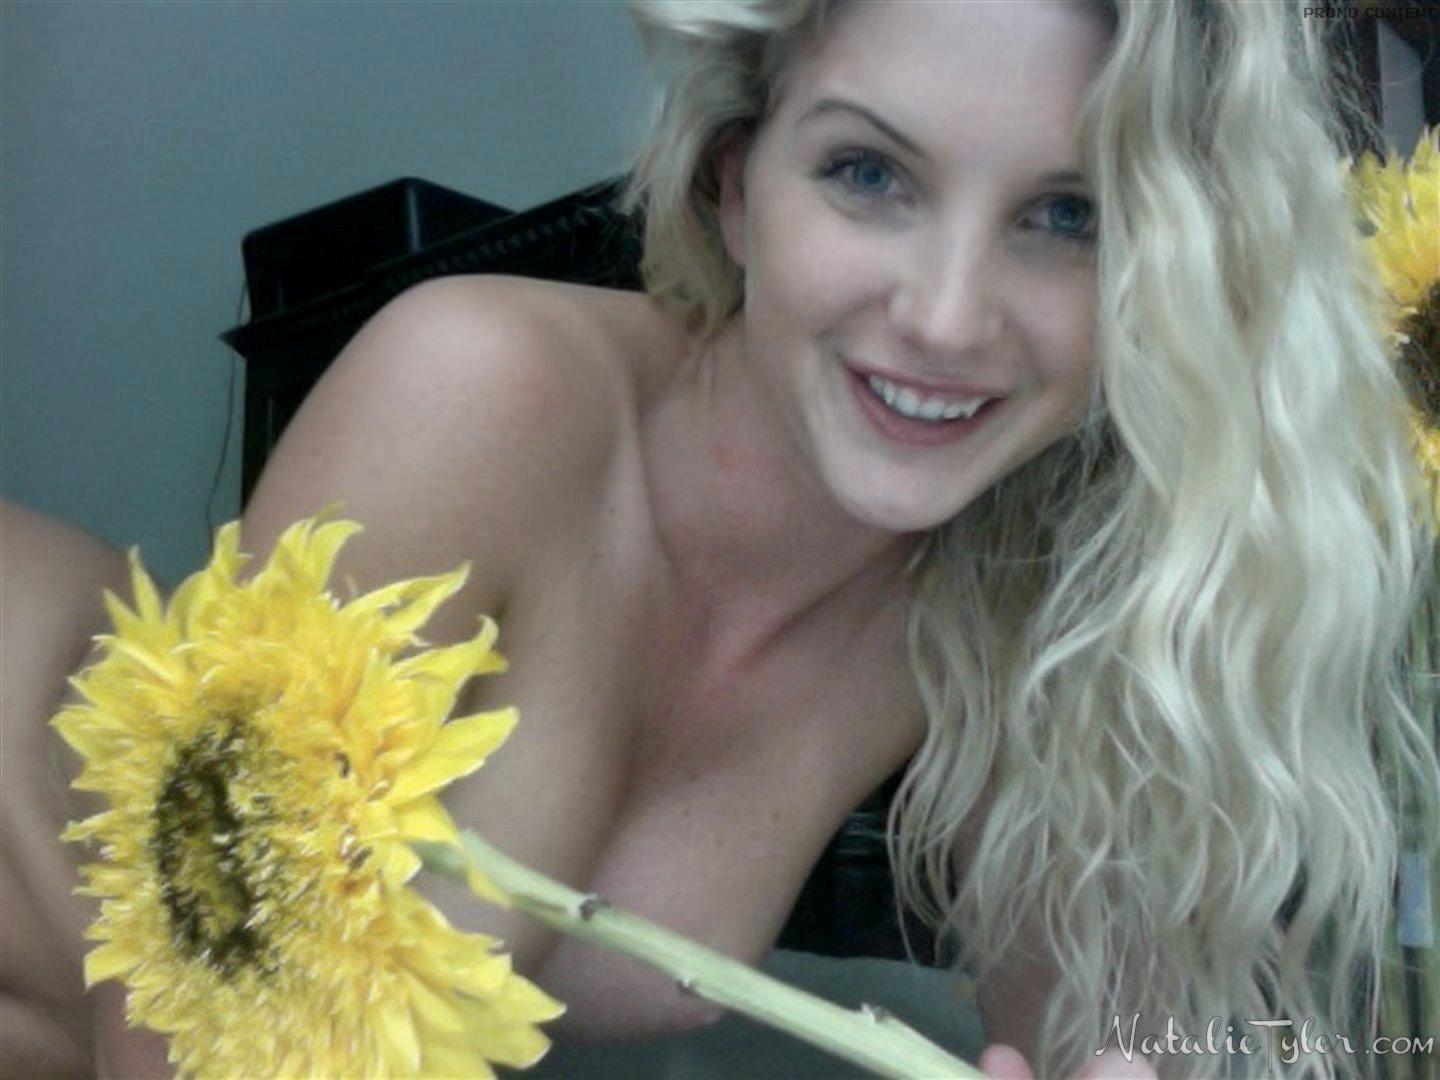 Pictures of Natalie Tyler showing you her pretty flower #59686830